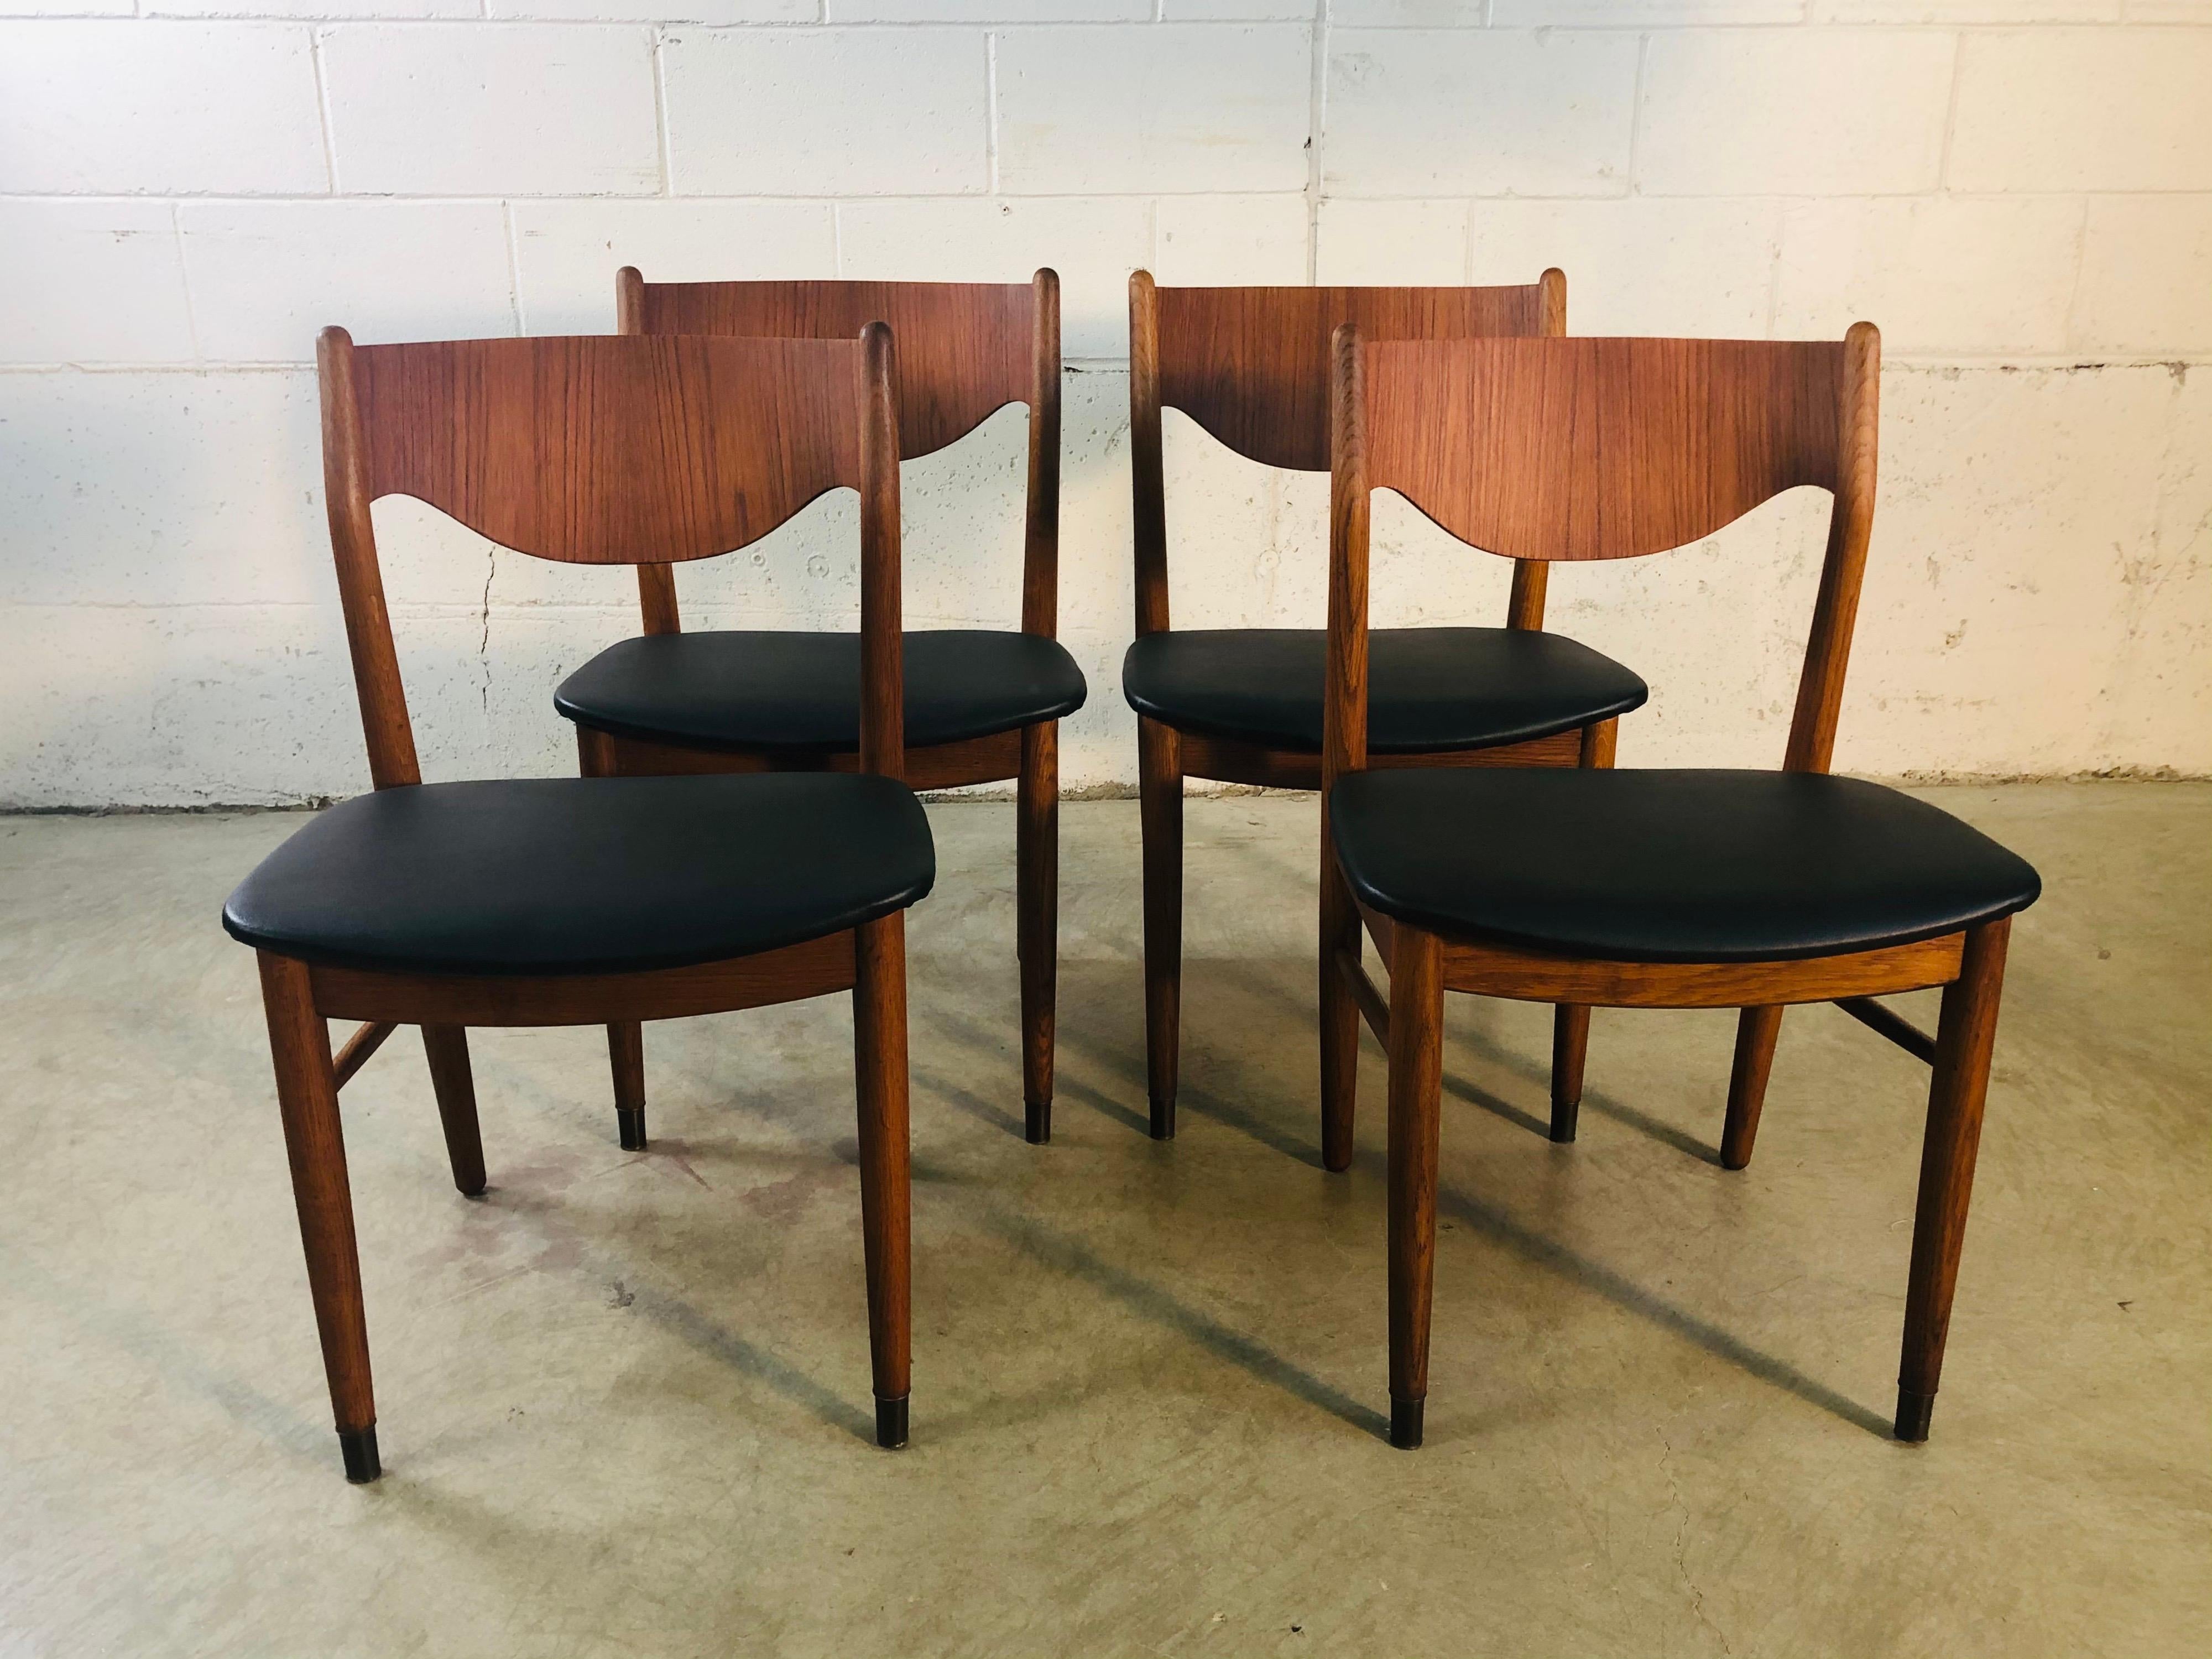 Vintage 1960s set of 4 Danish teak and beech wood rounded back dining room chairs. The chairs have brass accents on the feet. Great rounded backs and new Naugahyde seats. Newly refinished condition. No marks.